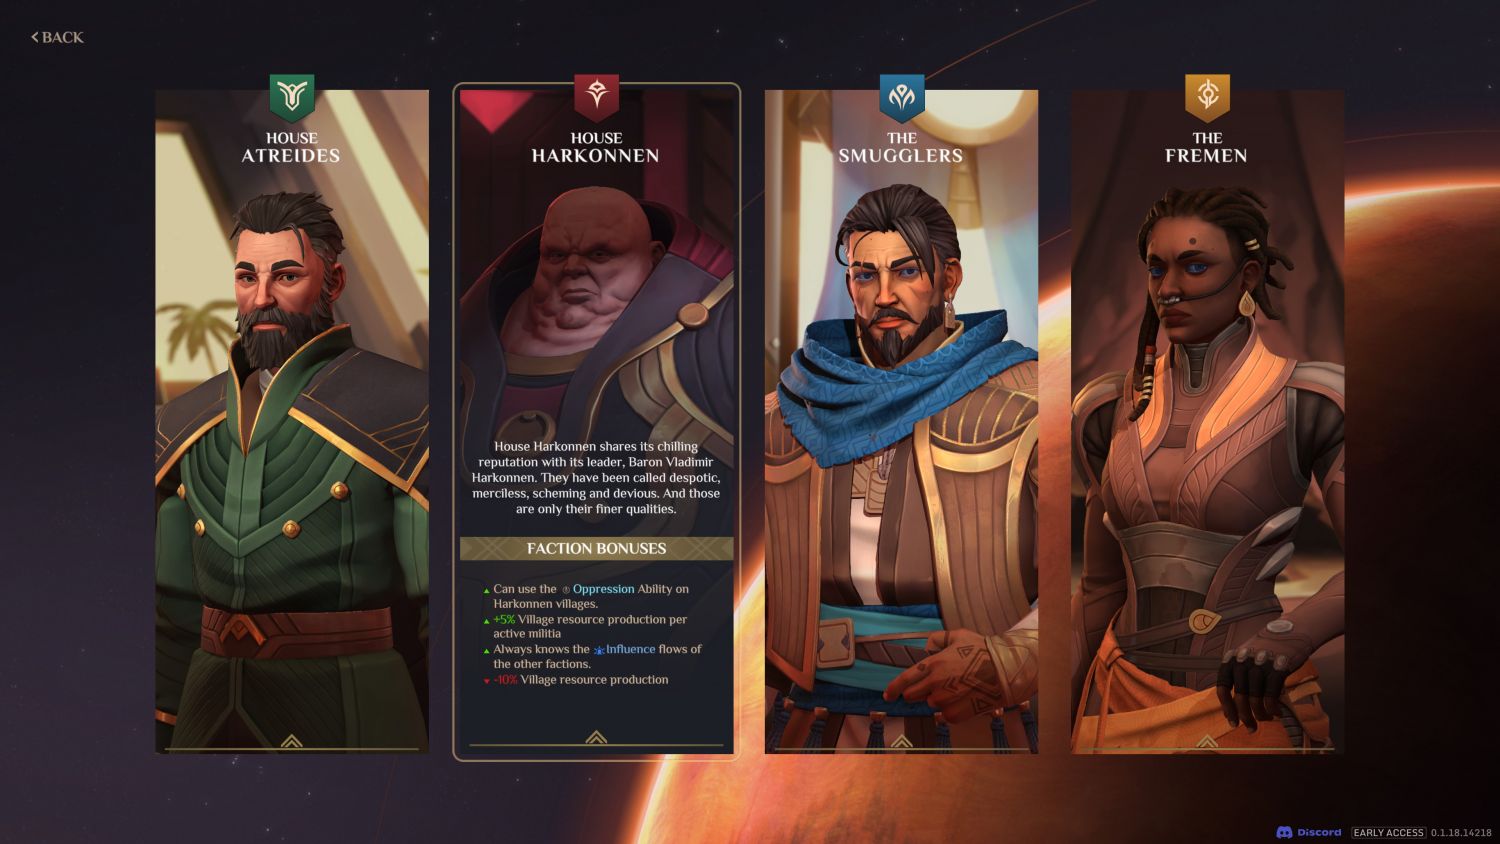 Geek Preview - Dune: Spice Wars: Choosing your factions
